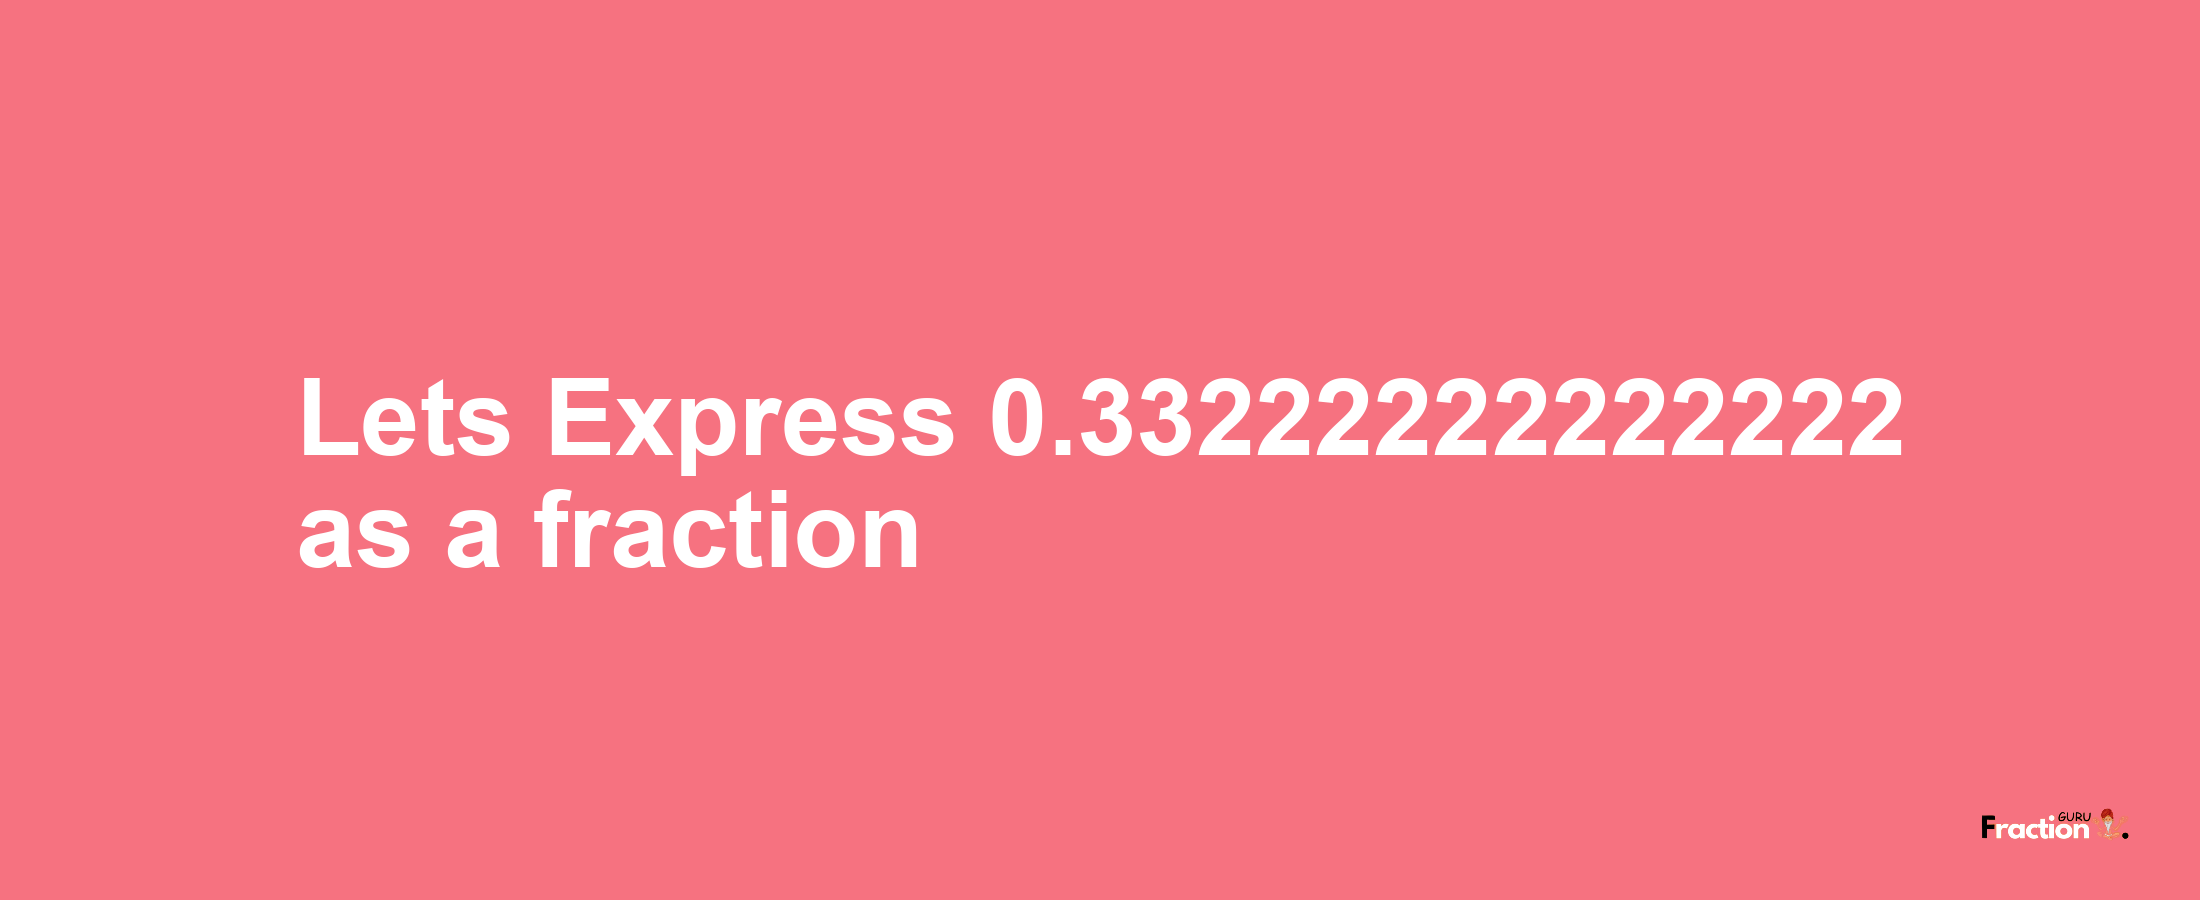 Lets Express 0.33222222222222 as afraction